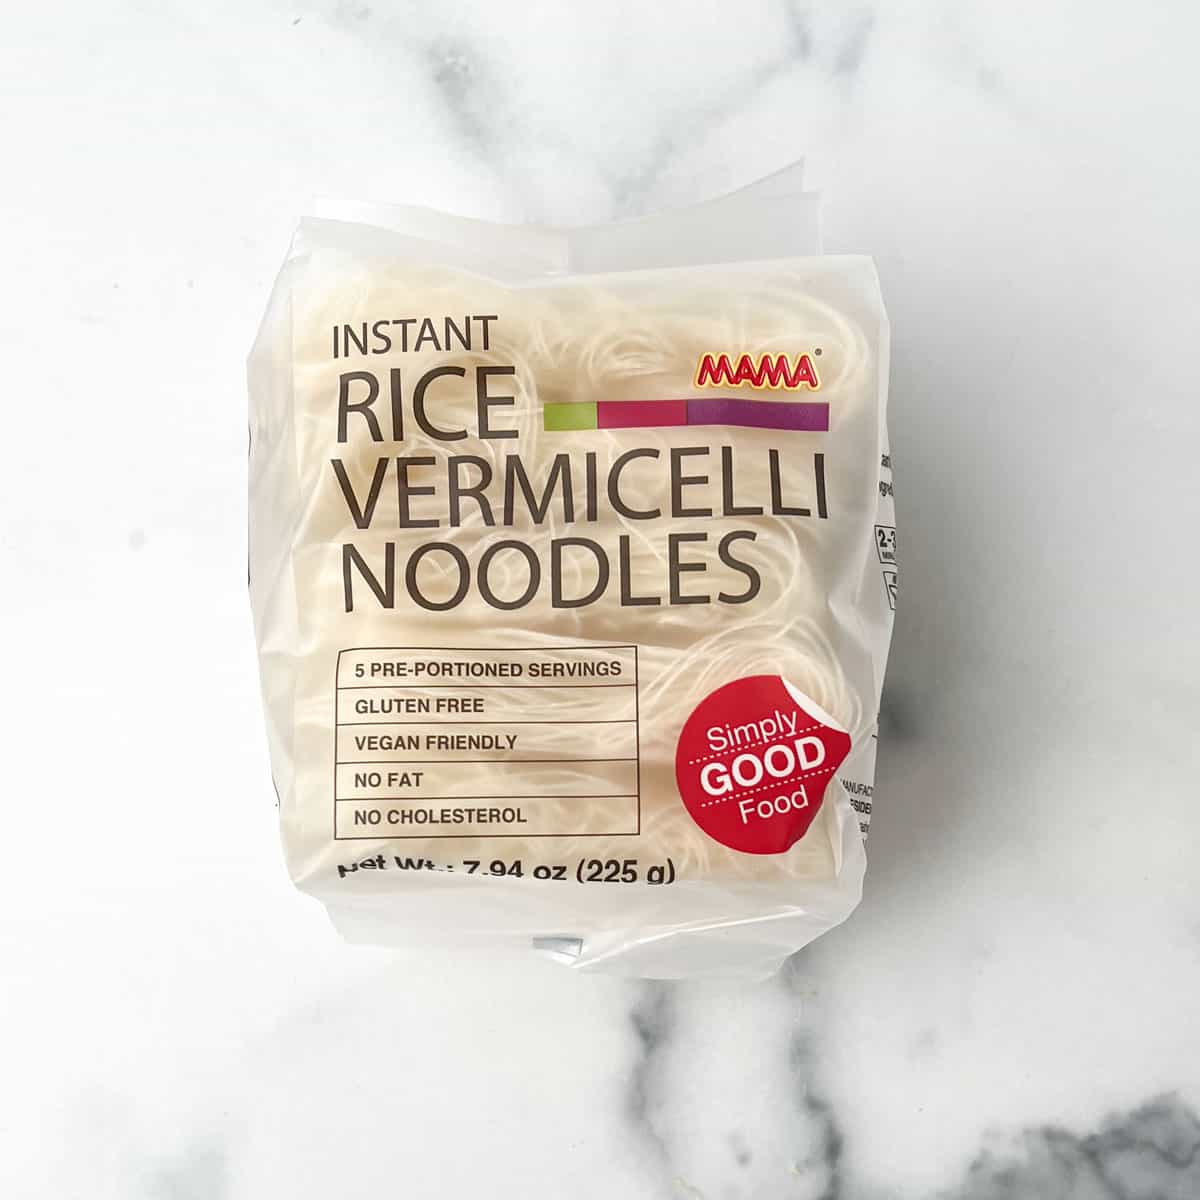 A package of instant rice vermicelli noodles on a countertop.